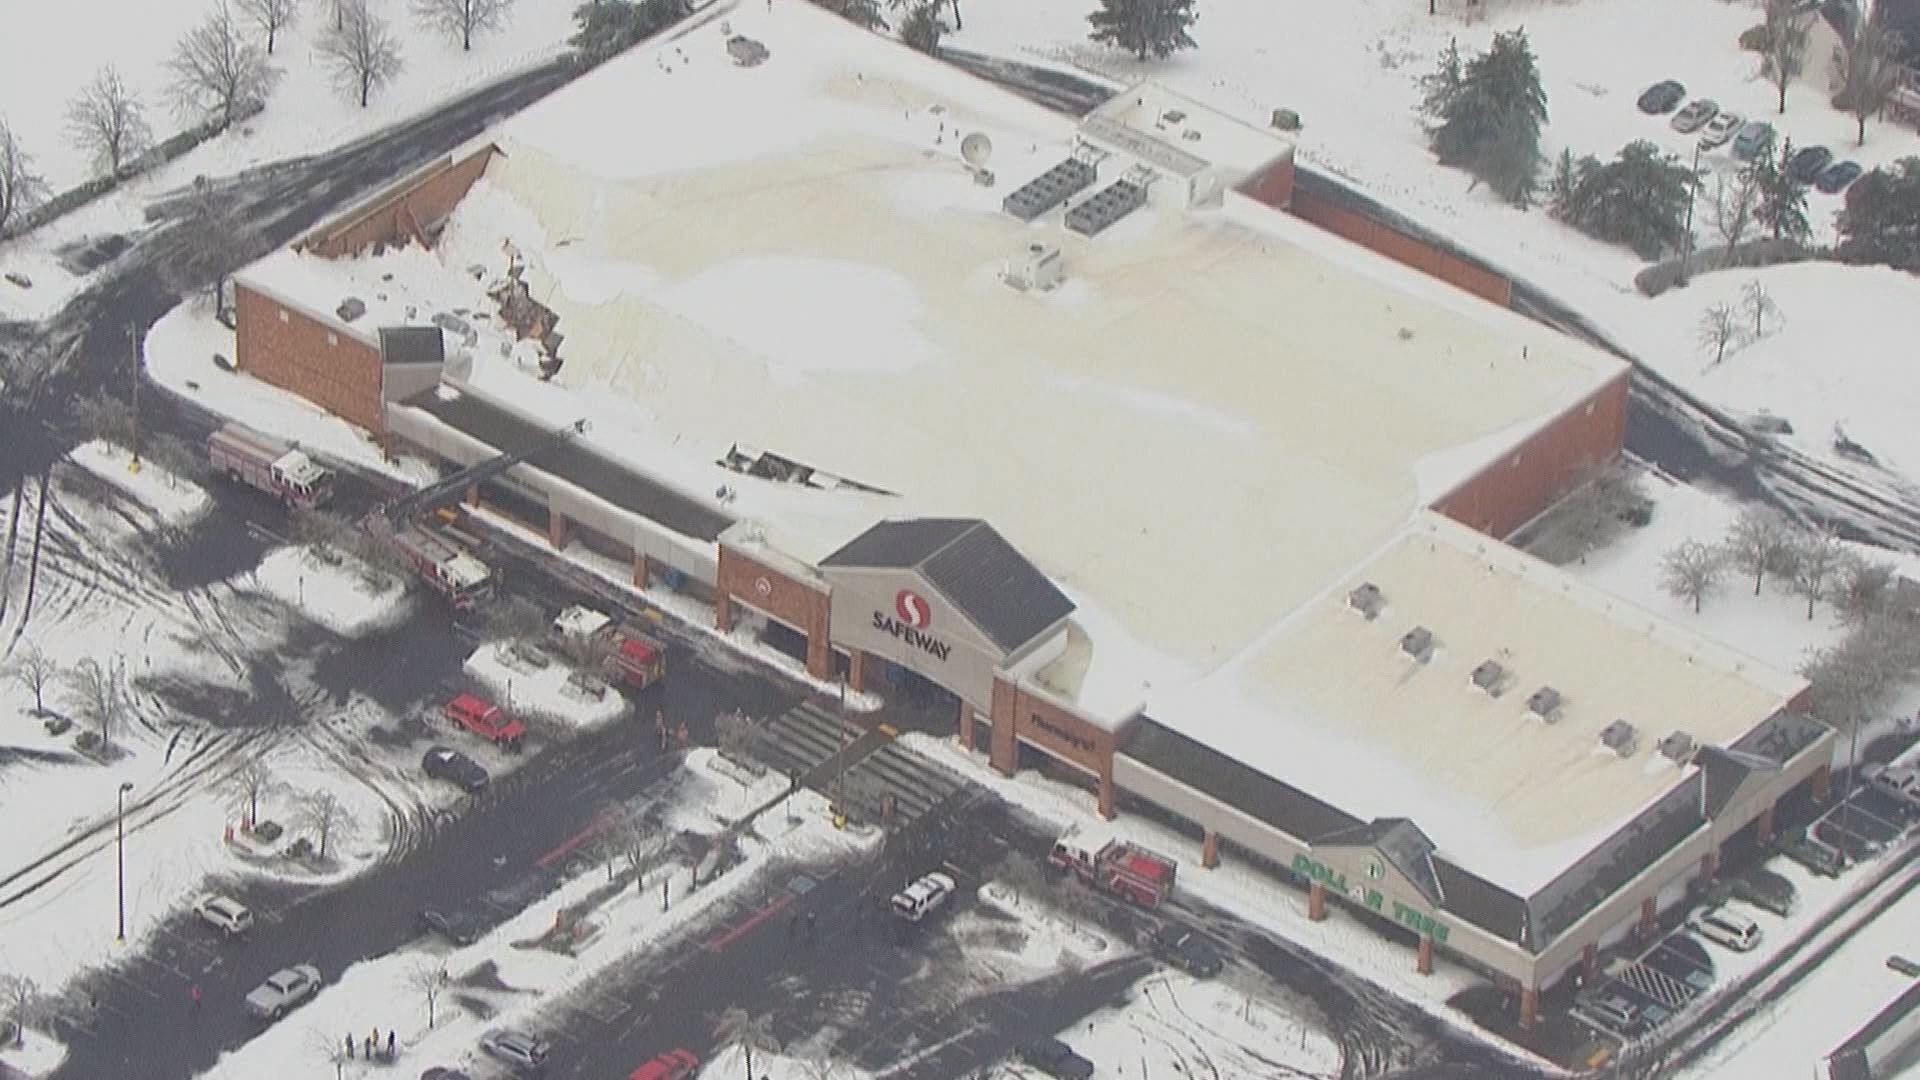 The Safeway store’s roof partially collapsed under heavy snow on Monday. Everyone in the store made it out safely and there were no reports of injuries.